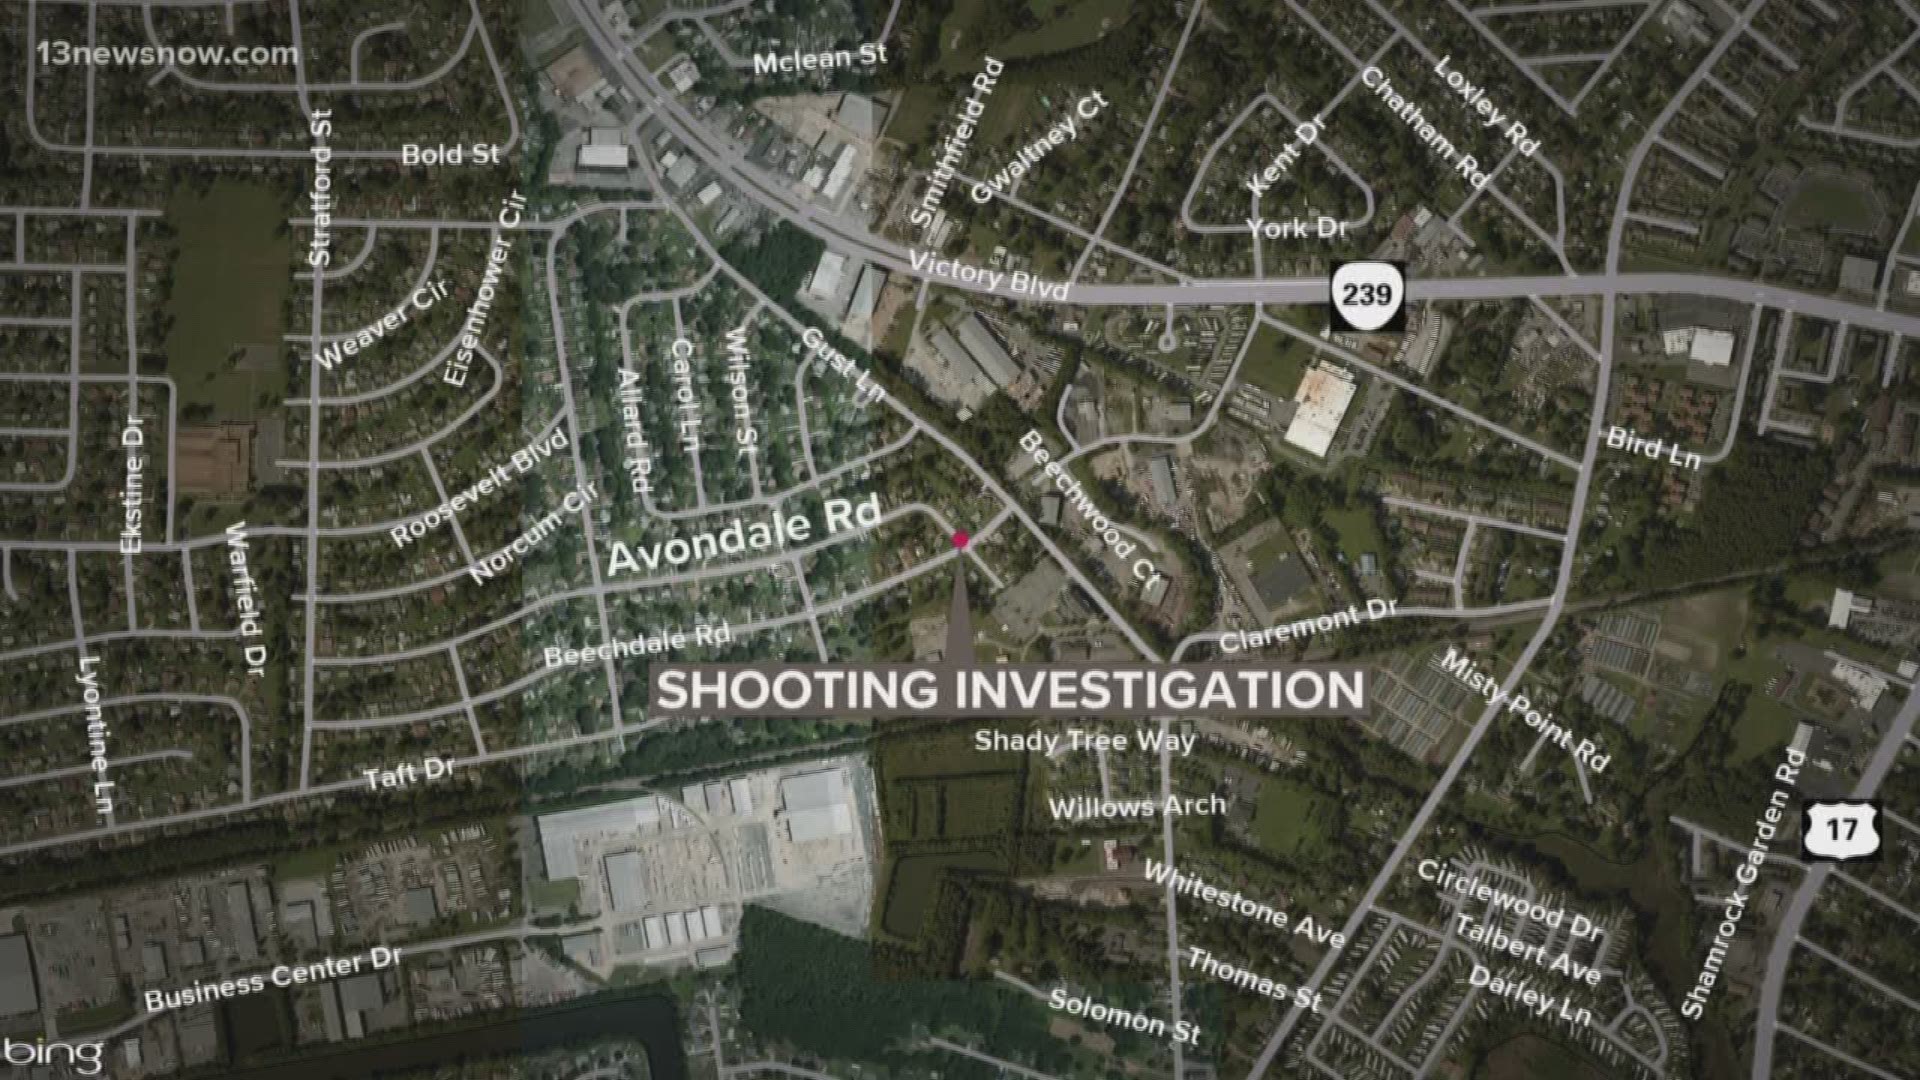 Police are investigating a shooting on Avondale Road this morning.